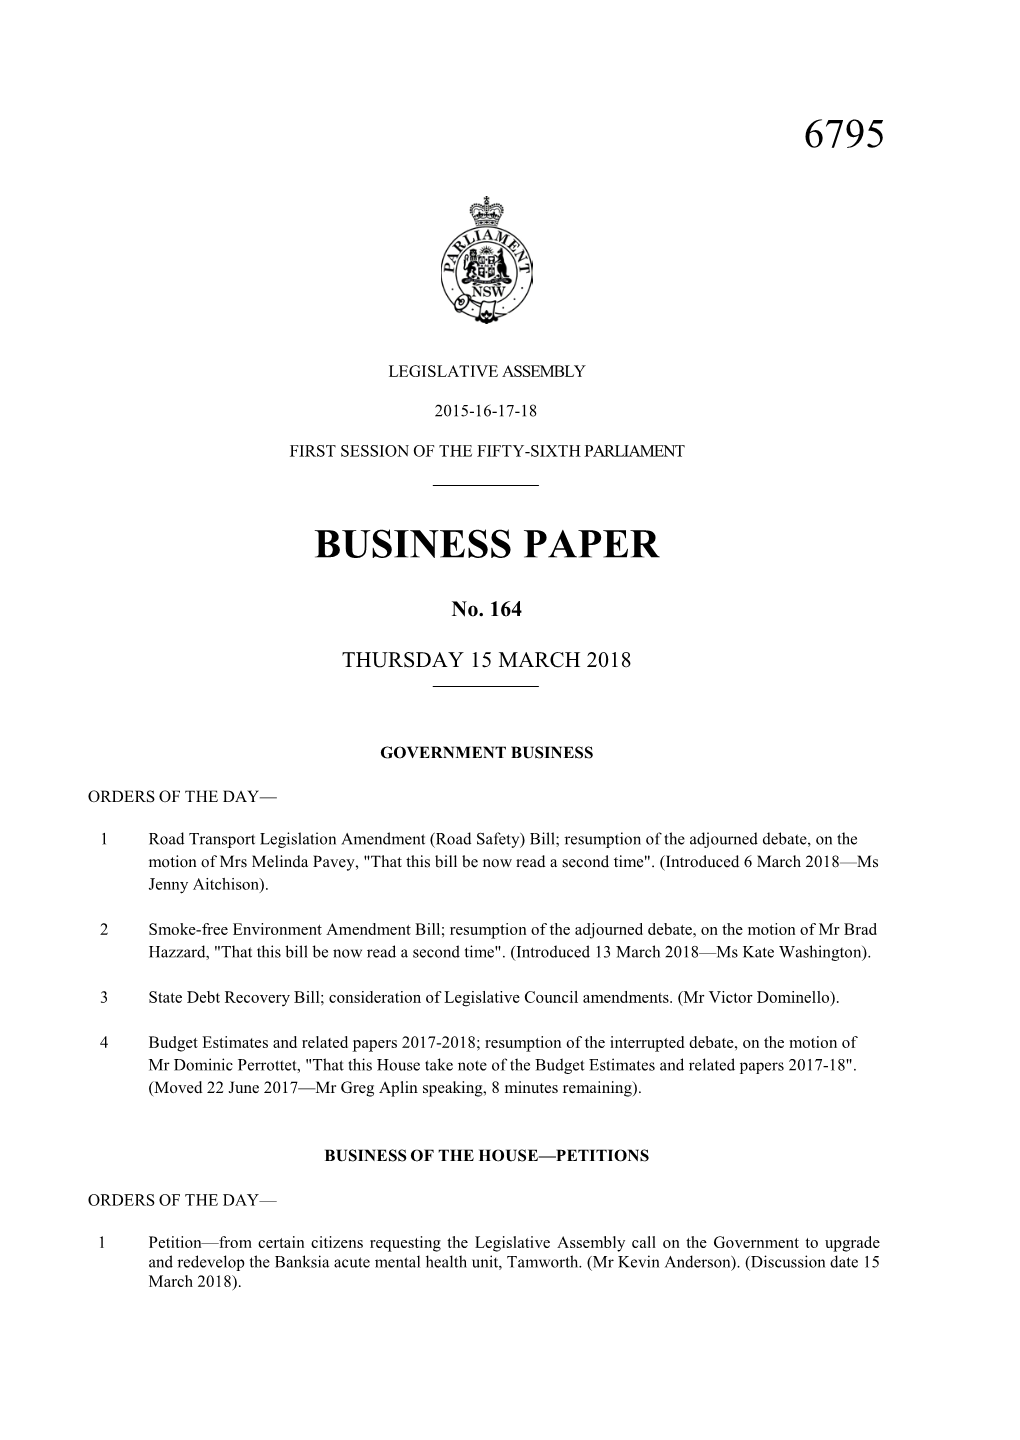 6795 Business Paper